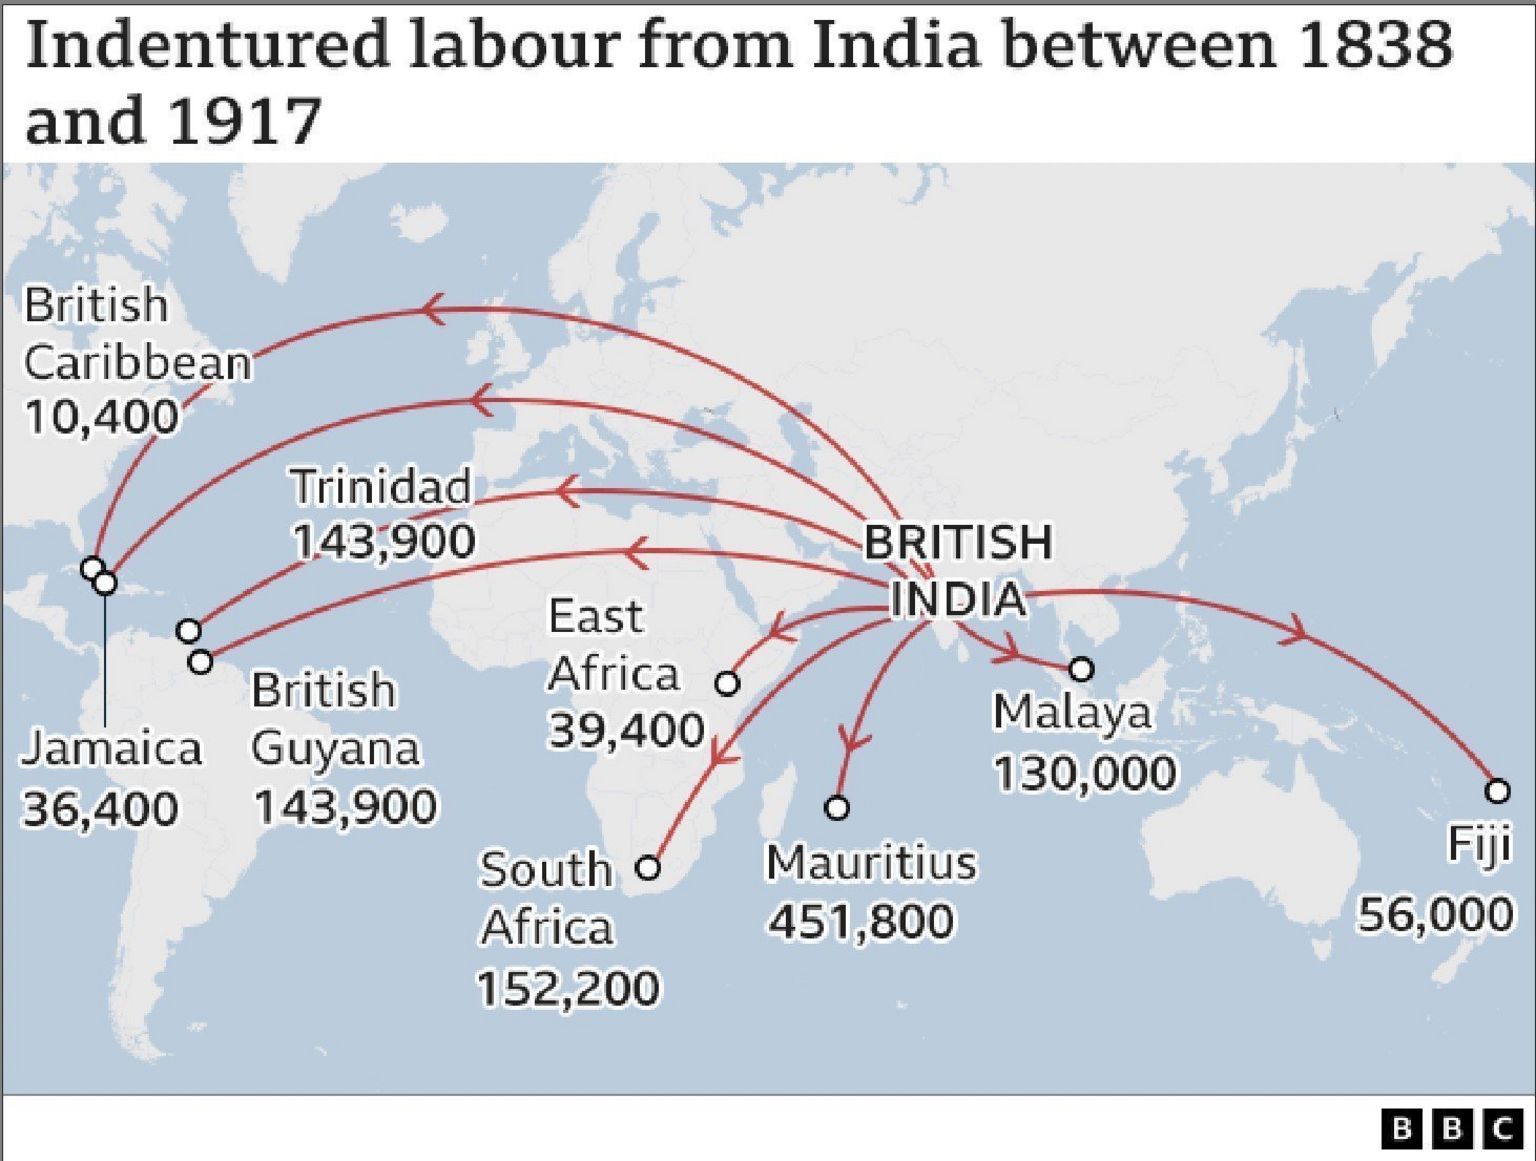 Over one million Indians were displaced ruing the colonial era